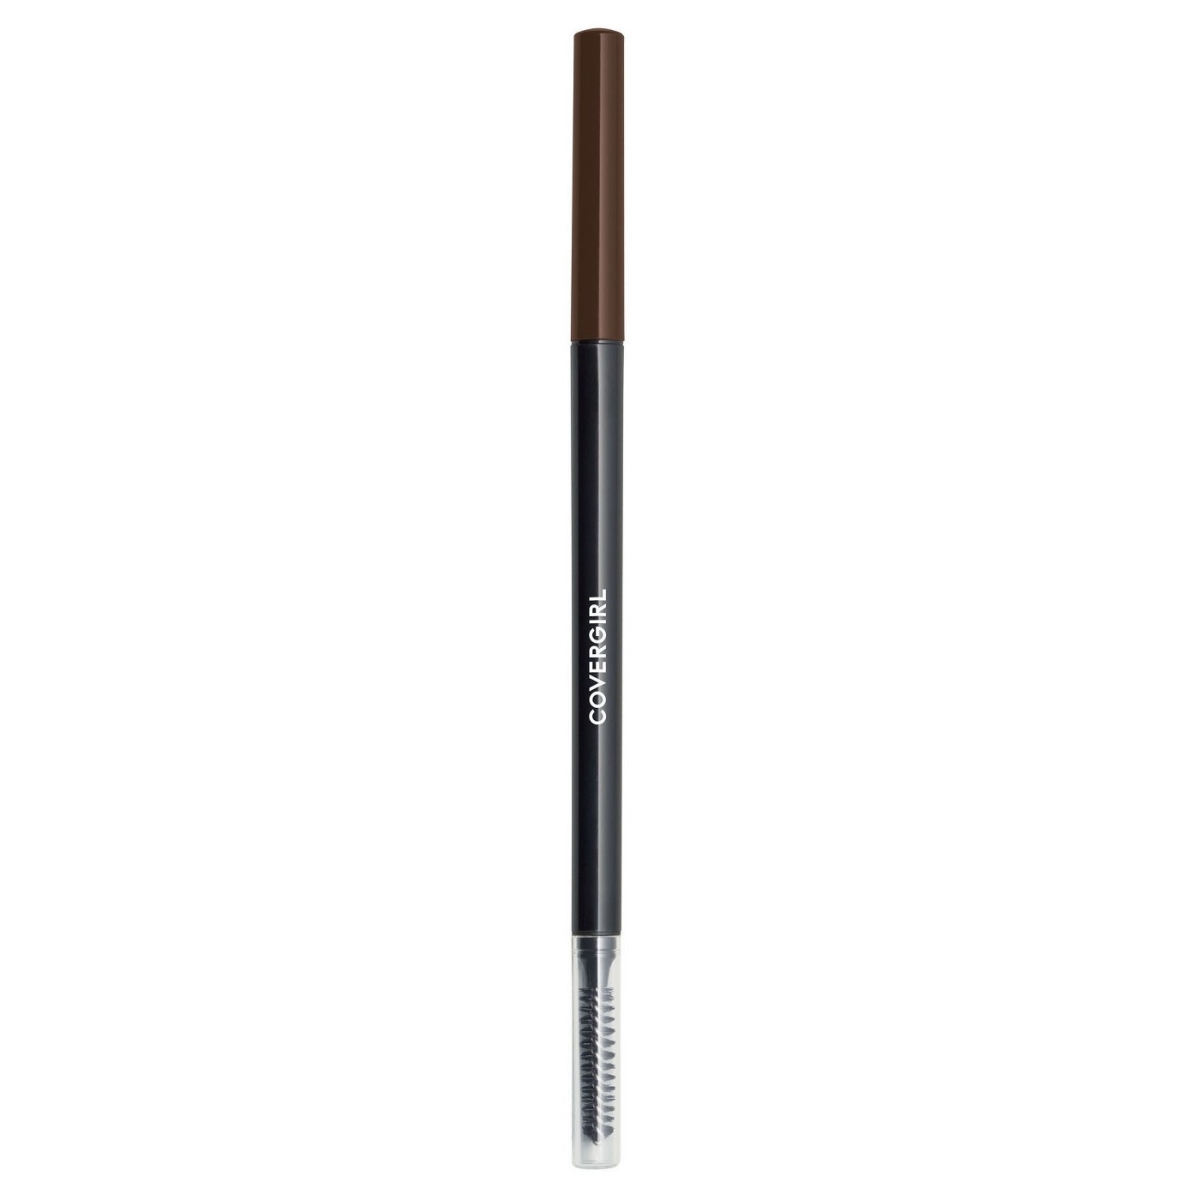 8163391 Covergirl Easy Breezy Micro-fine Plus Define Eyebrow Pencil, 710 Soft Brown - Pack Of 2